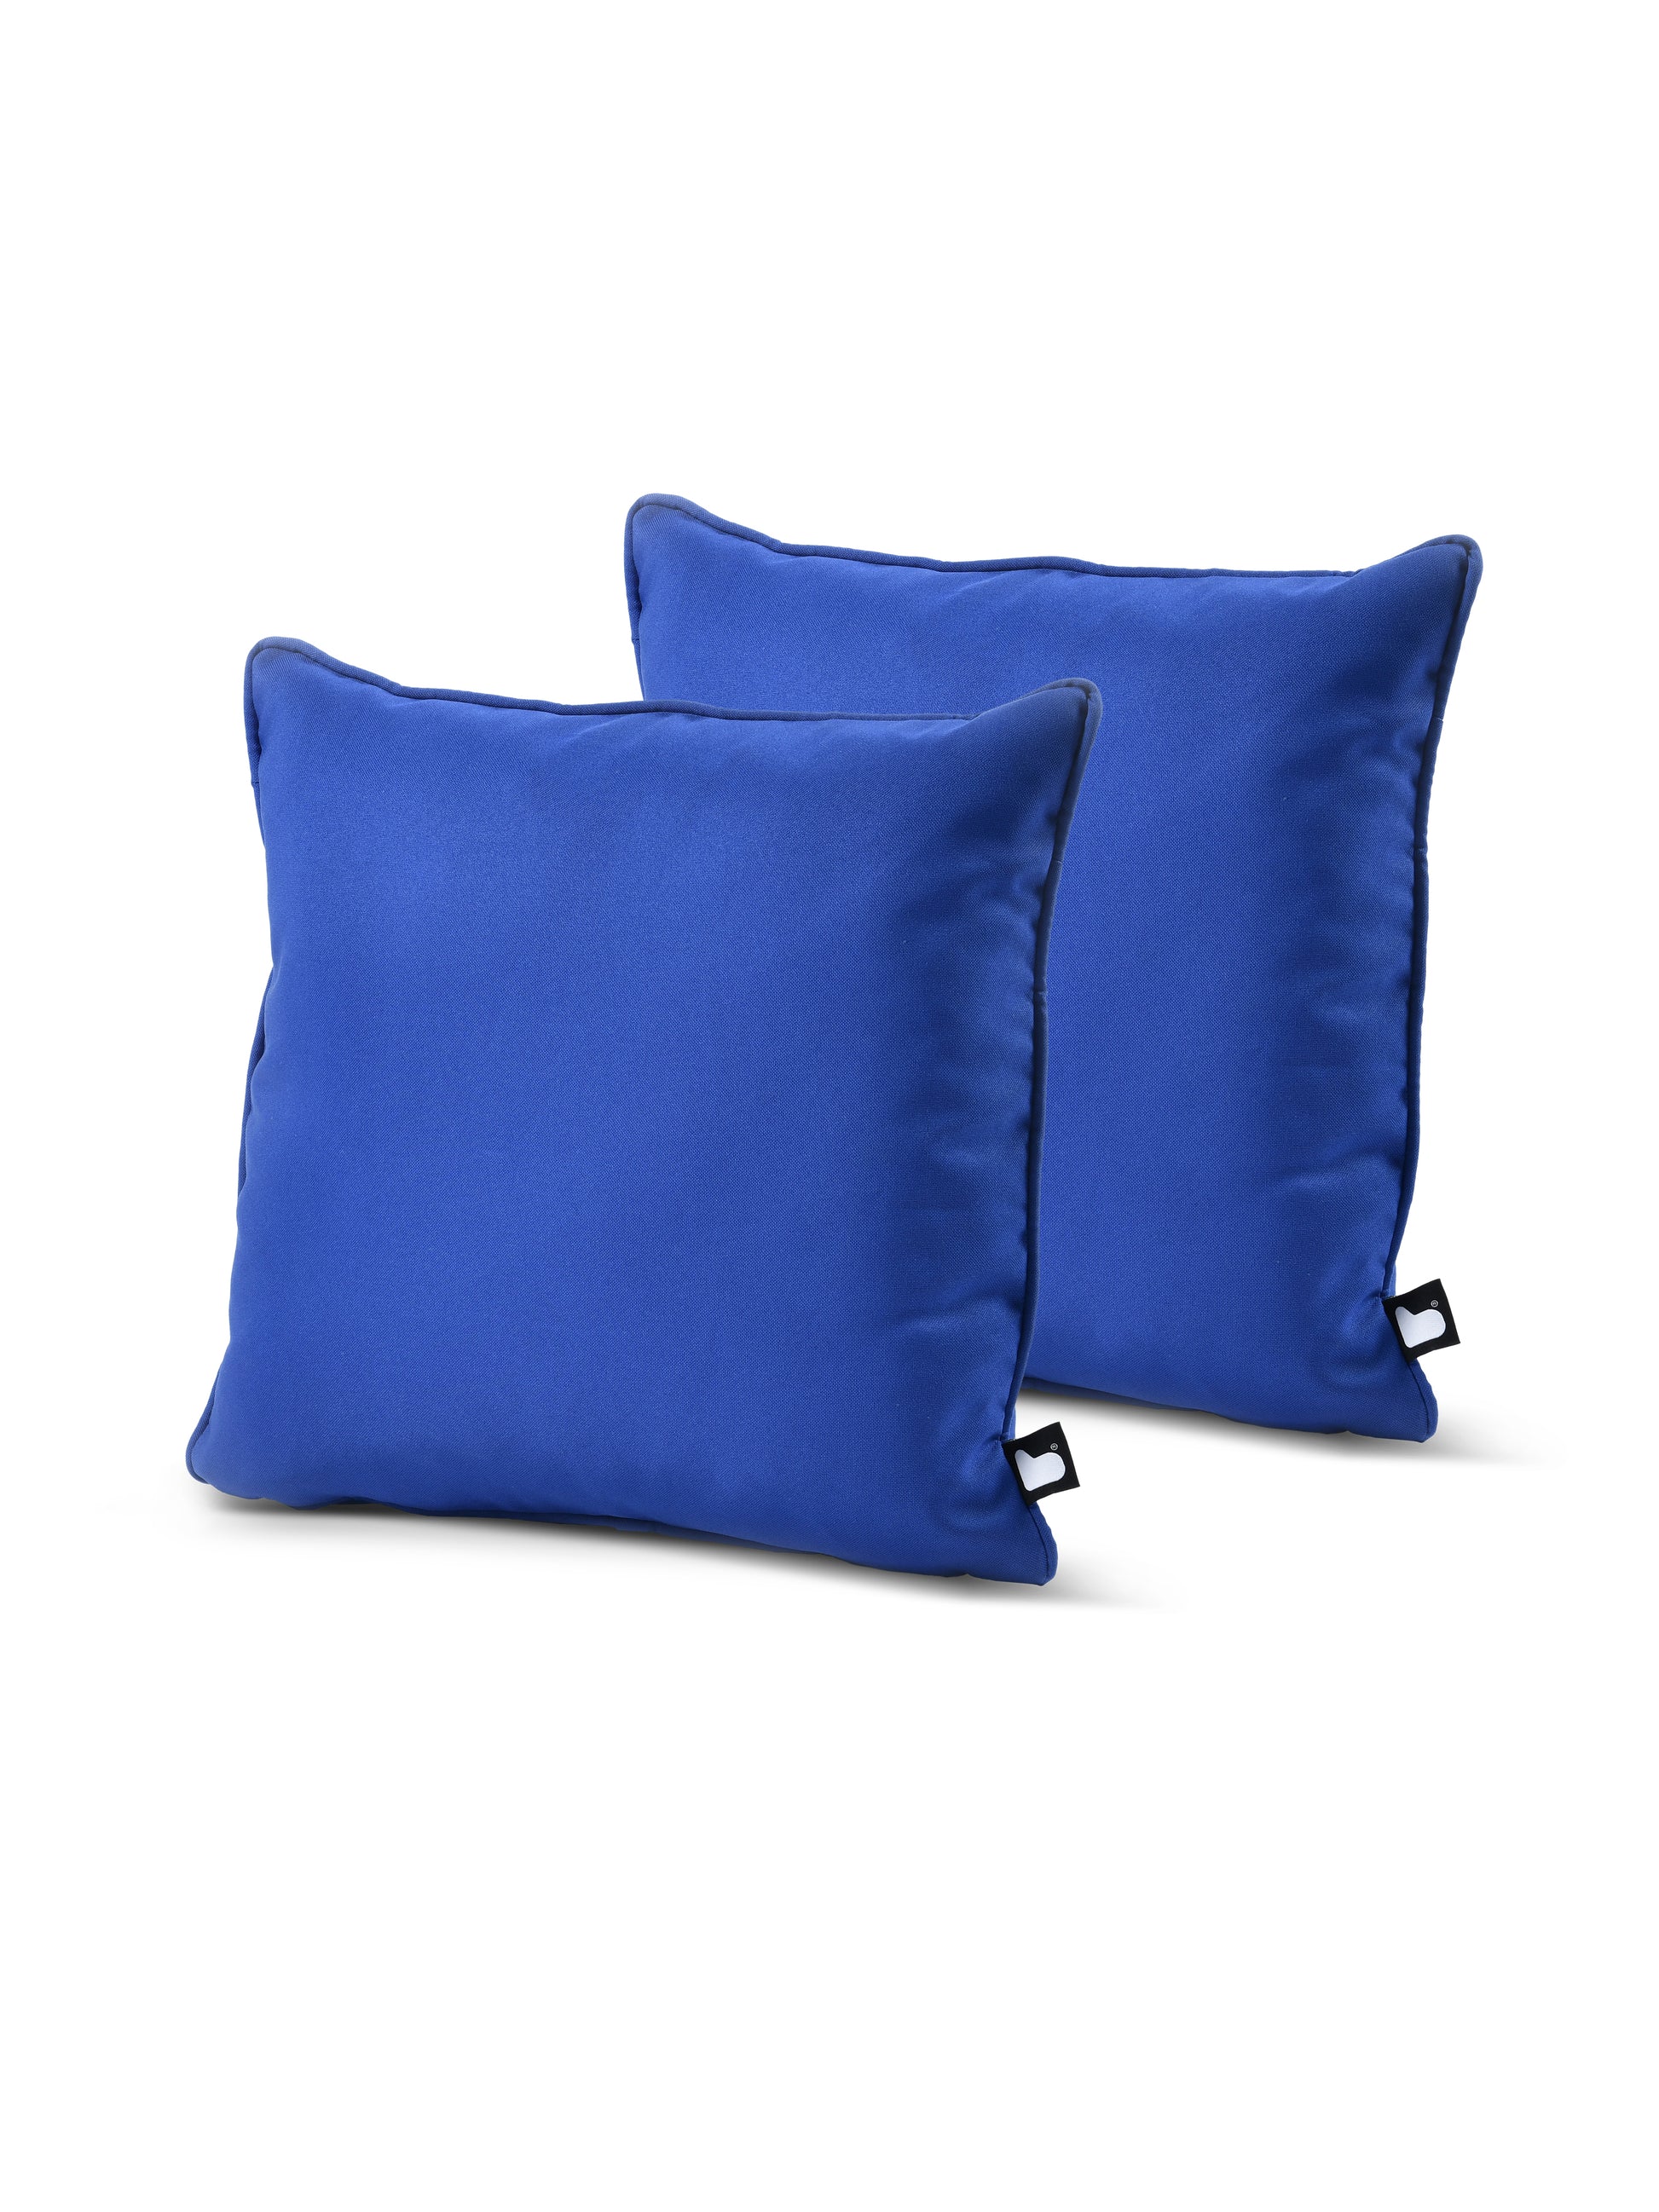 Two blue "B Cushion Twin Pack Brights Collection" pillows by Brisks with a smooth, satin-like finish, made of breathable polyester. The pillow on the left is positioned slightly forward, with the second pillow behind it, partially visible. Both pillows have a small black tag on one side. The white background highlights the pillows.